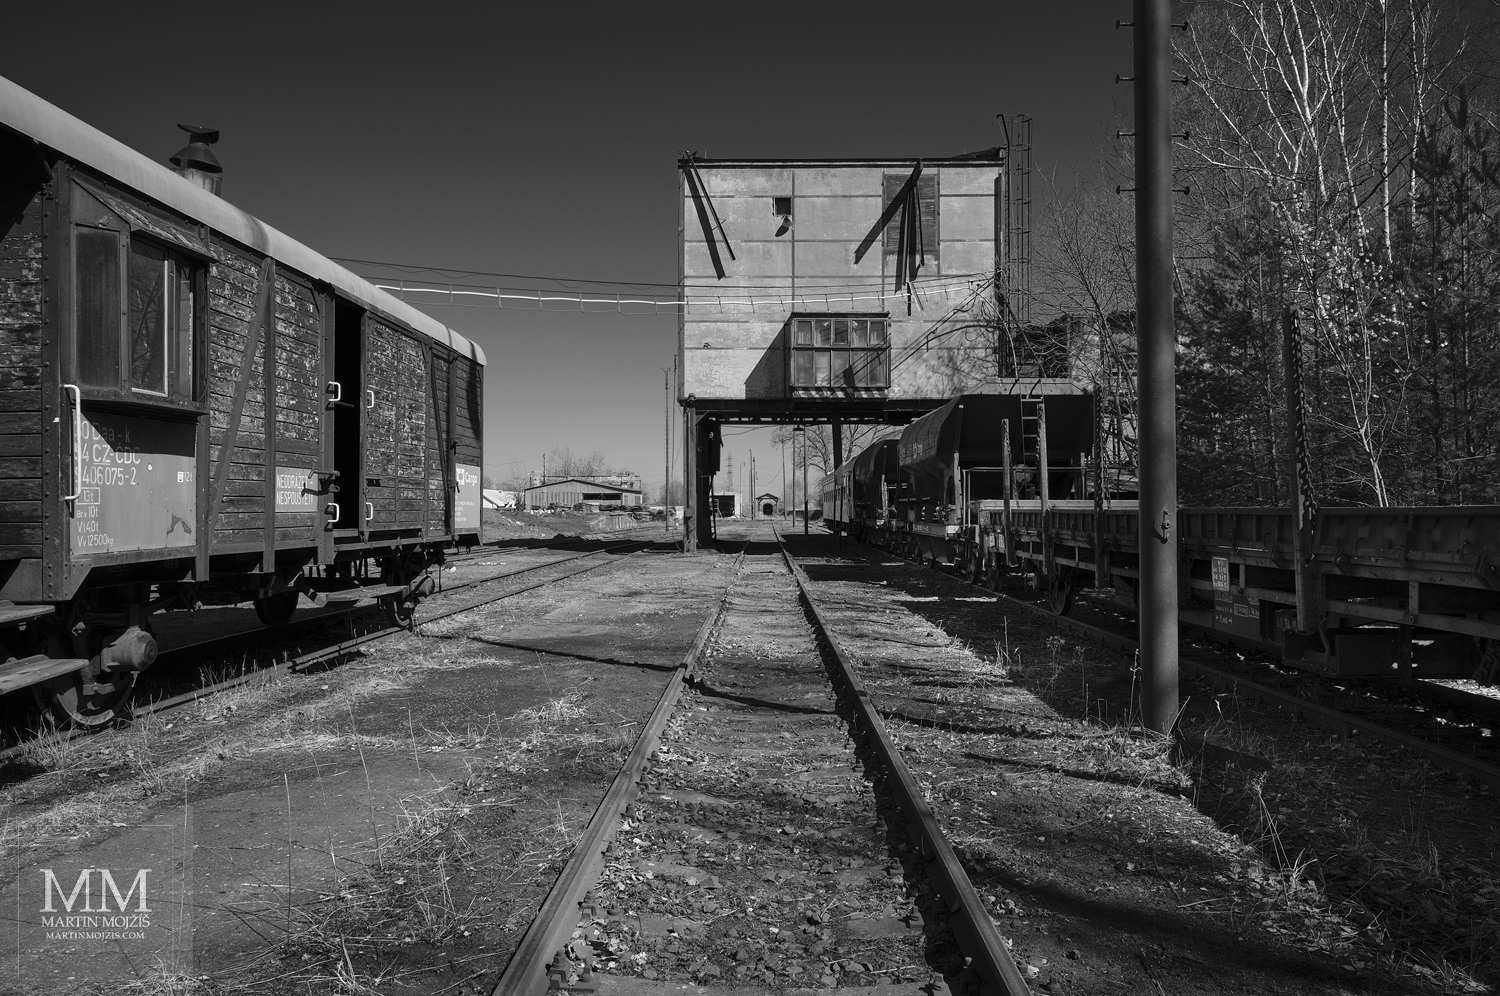 Fine Art large format photograph THE HIDDEN TRAIN STATION, photographed by Martin Mojzis.